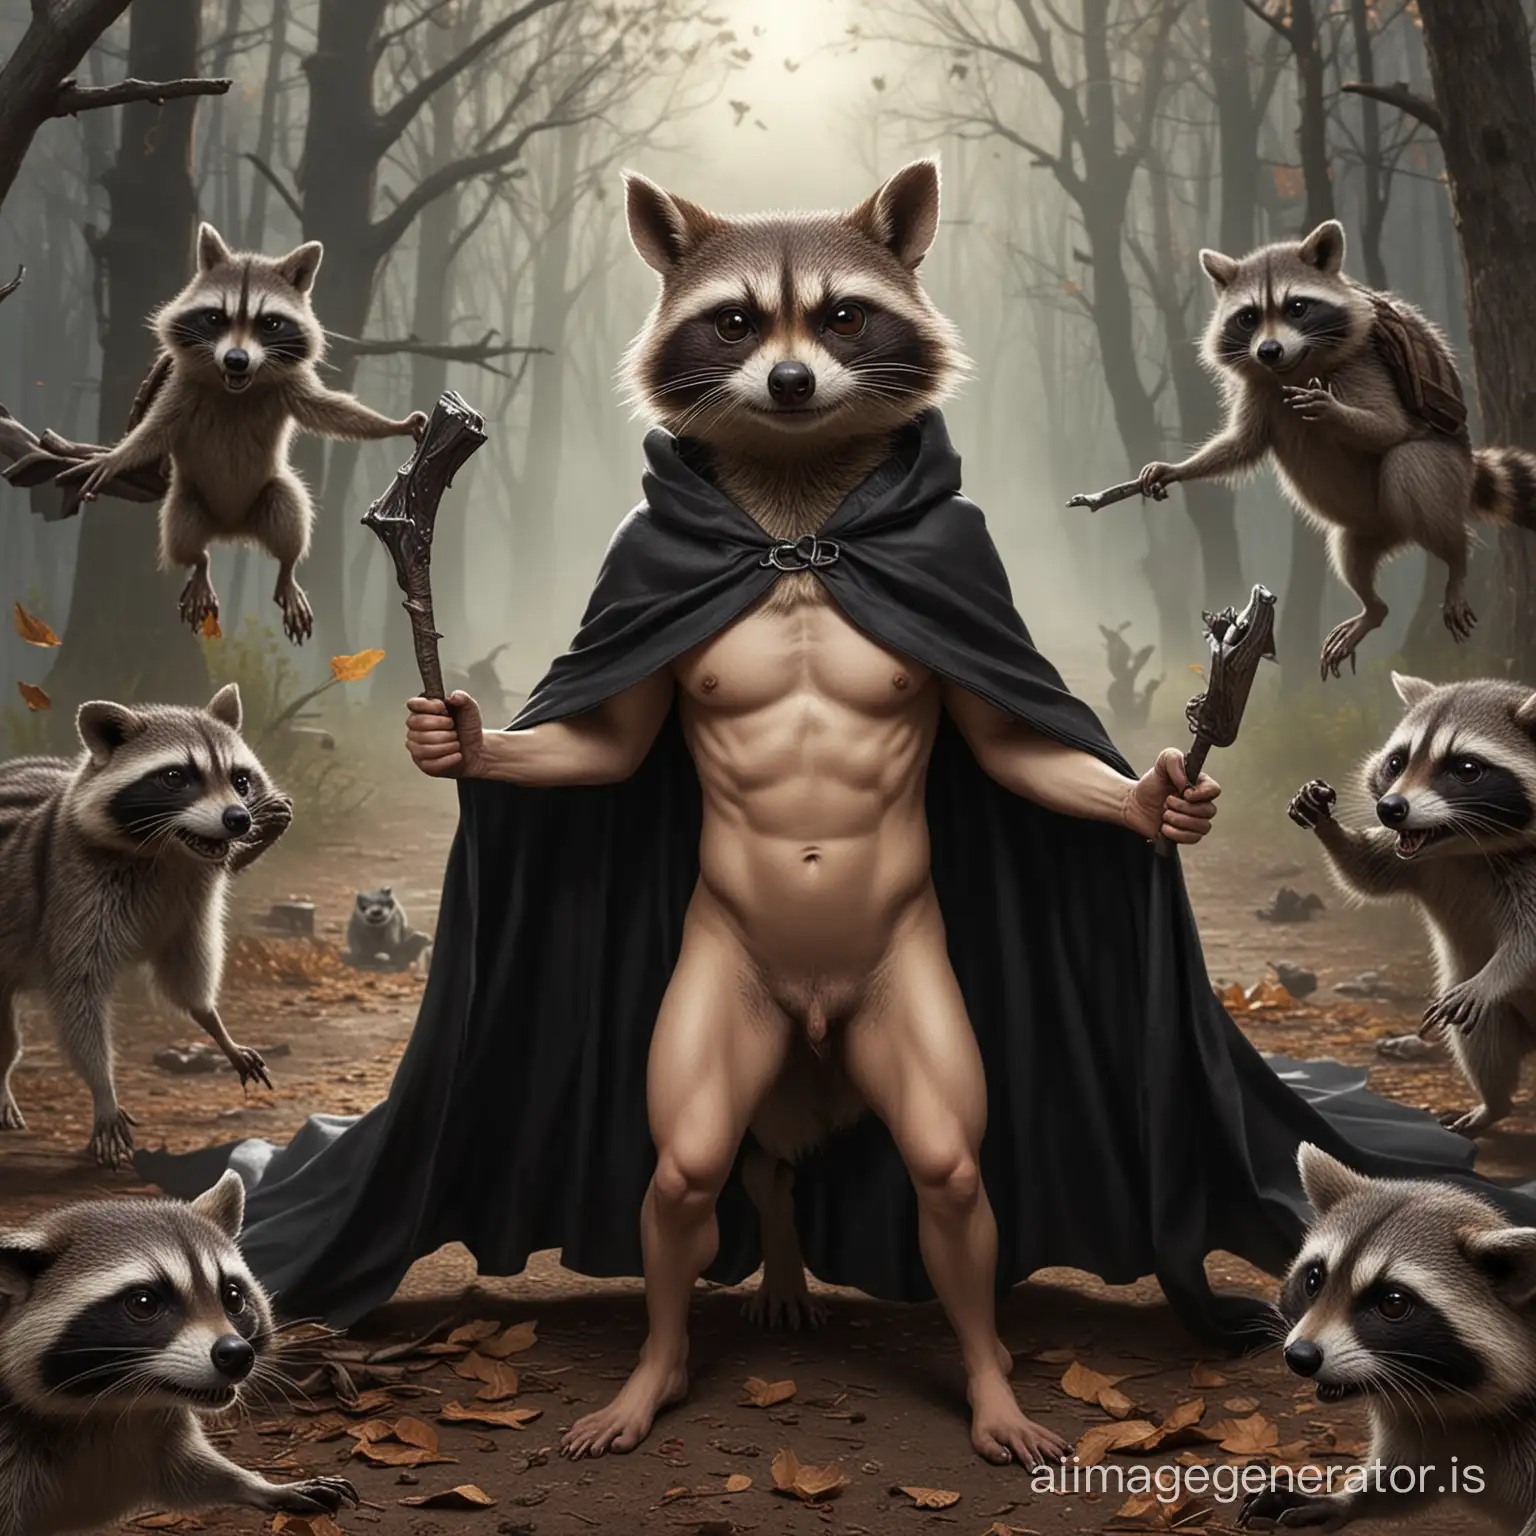 Naked-Sparrow-Unfolding-Black-Cloak-Confrontation-with-Evil-Raccoons